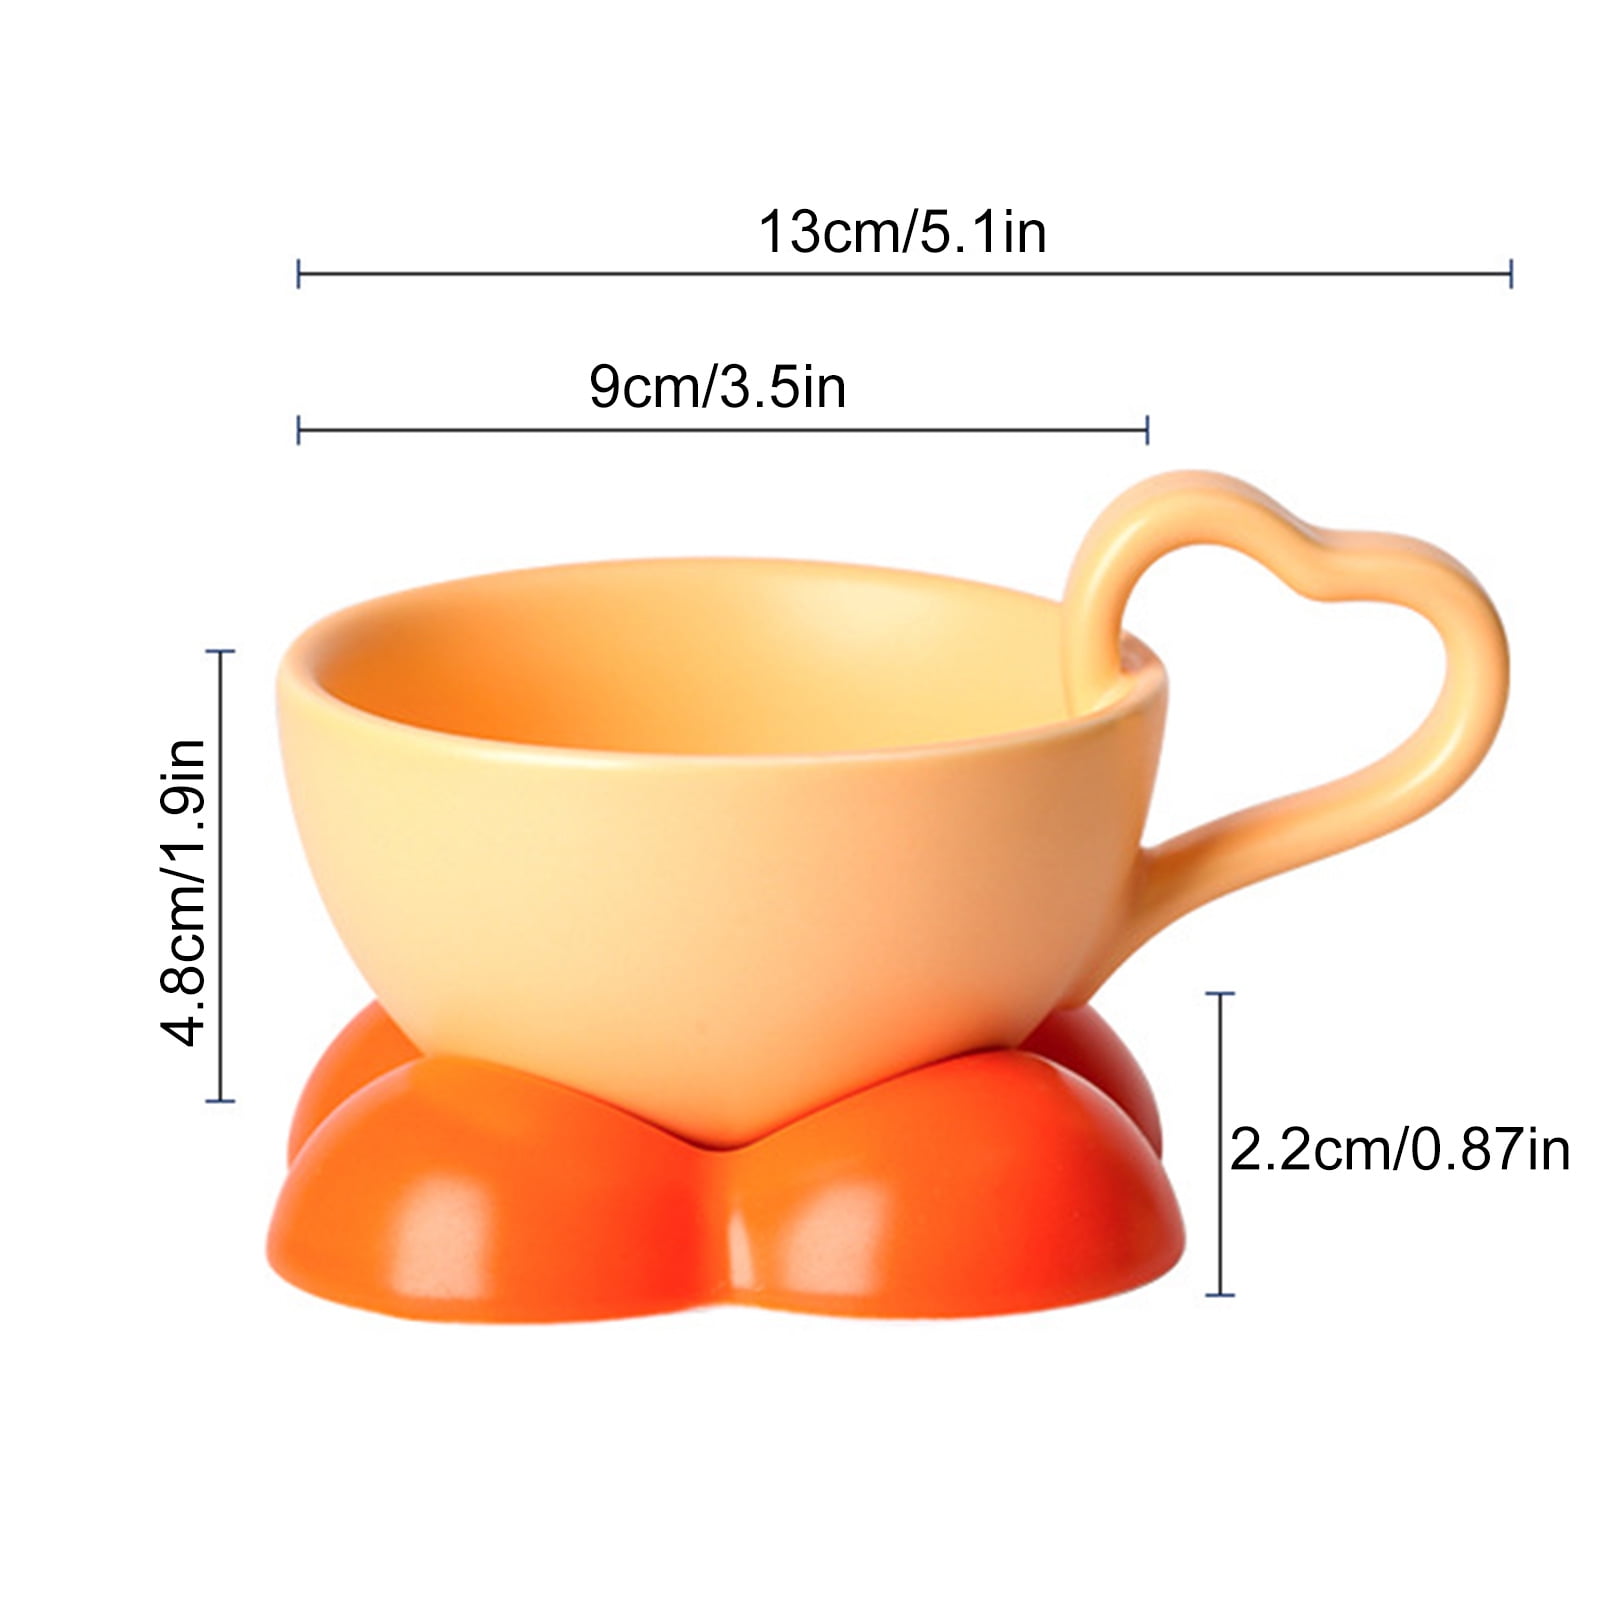 300ml 10oz Heart Shape Coffee Mug Creative Personality Unique Design  Ceramic Cup with Heart Shape Handle Lovely Gift for Besties